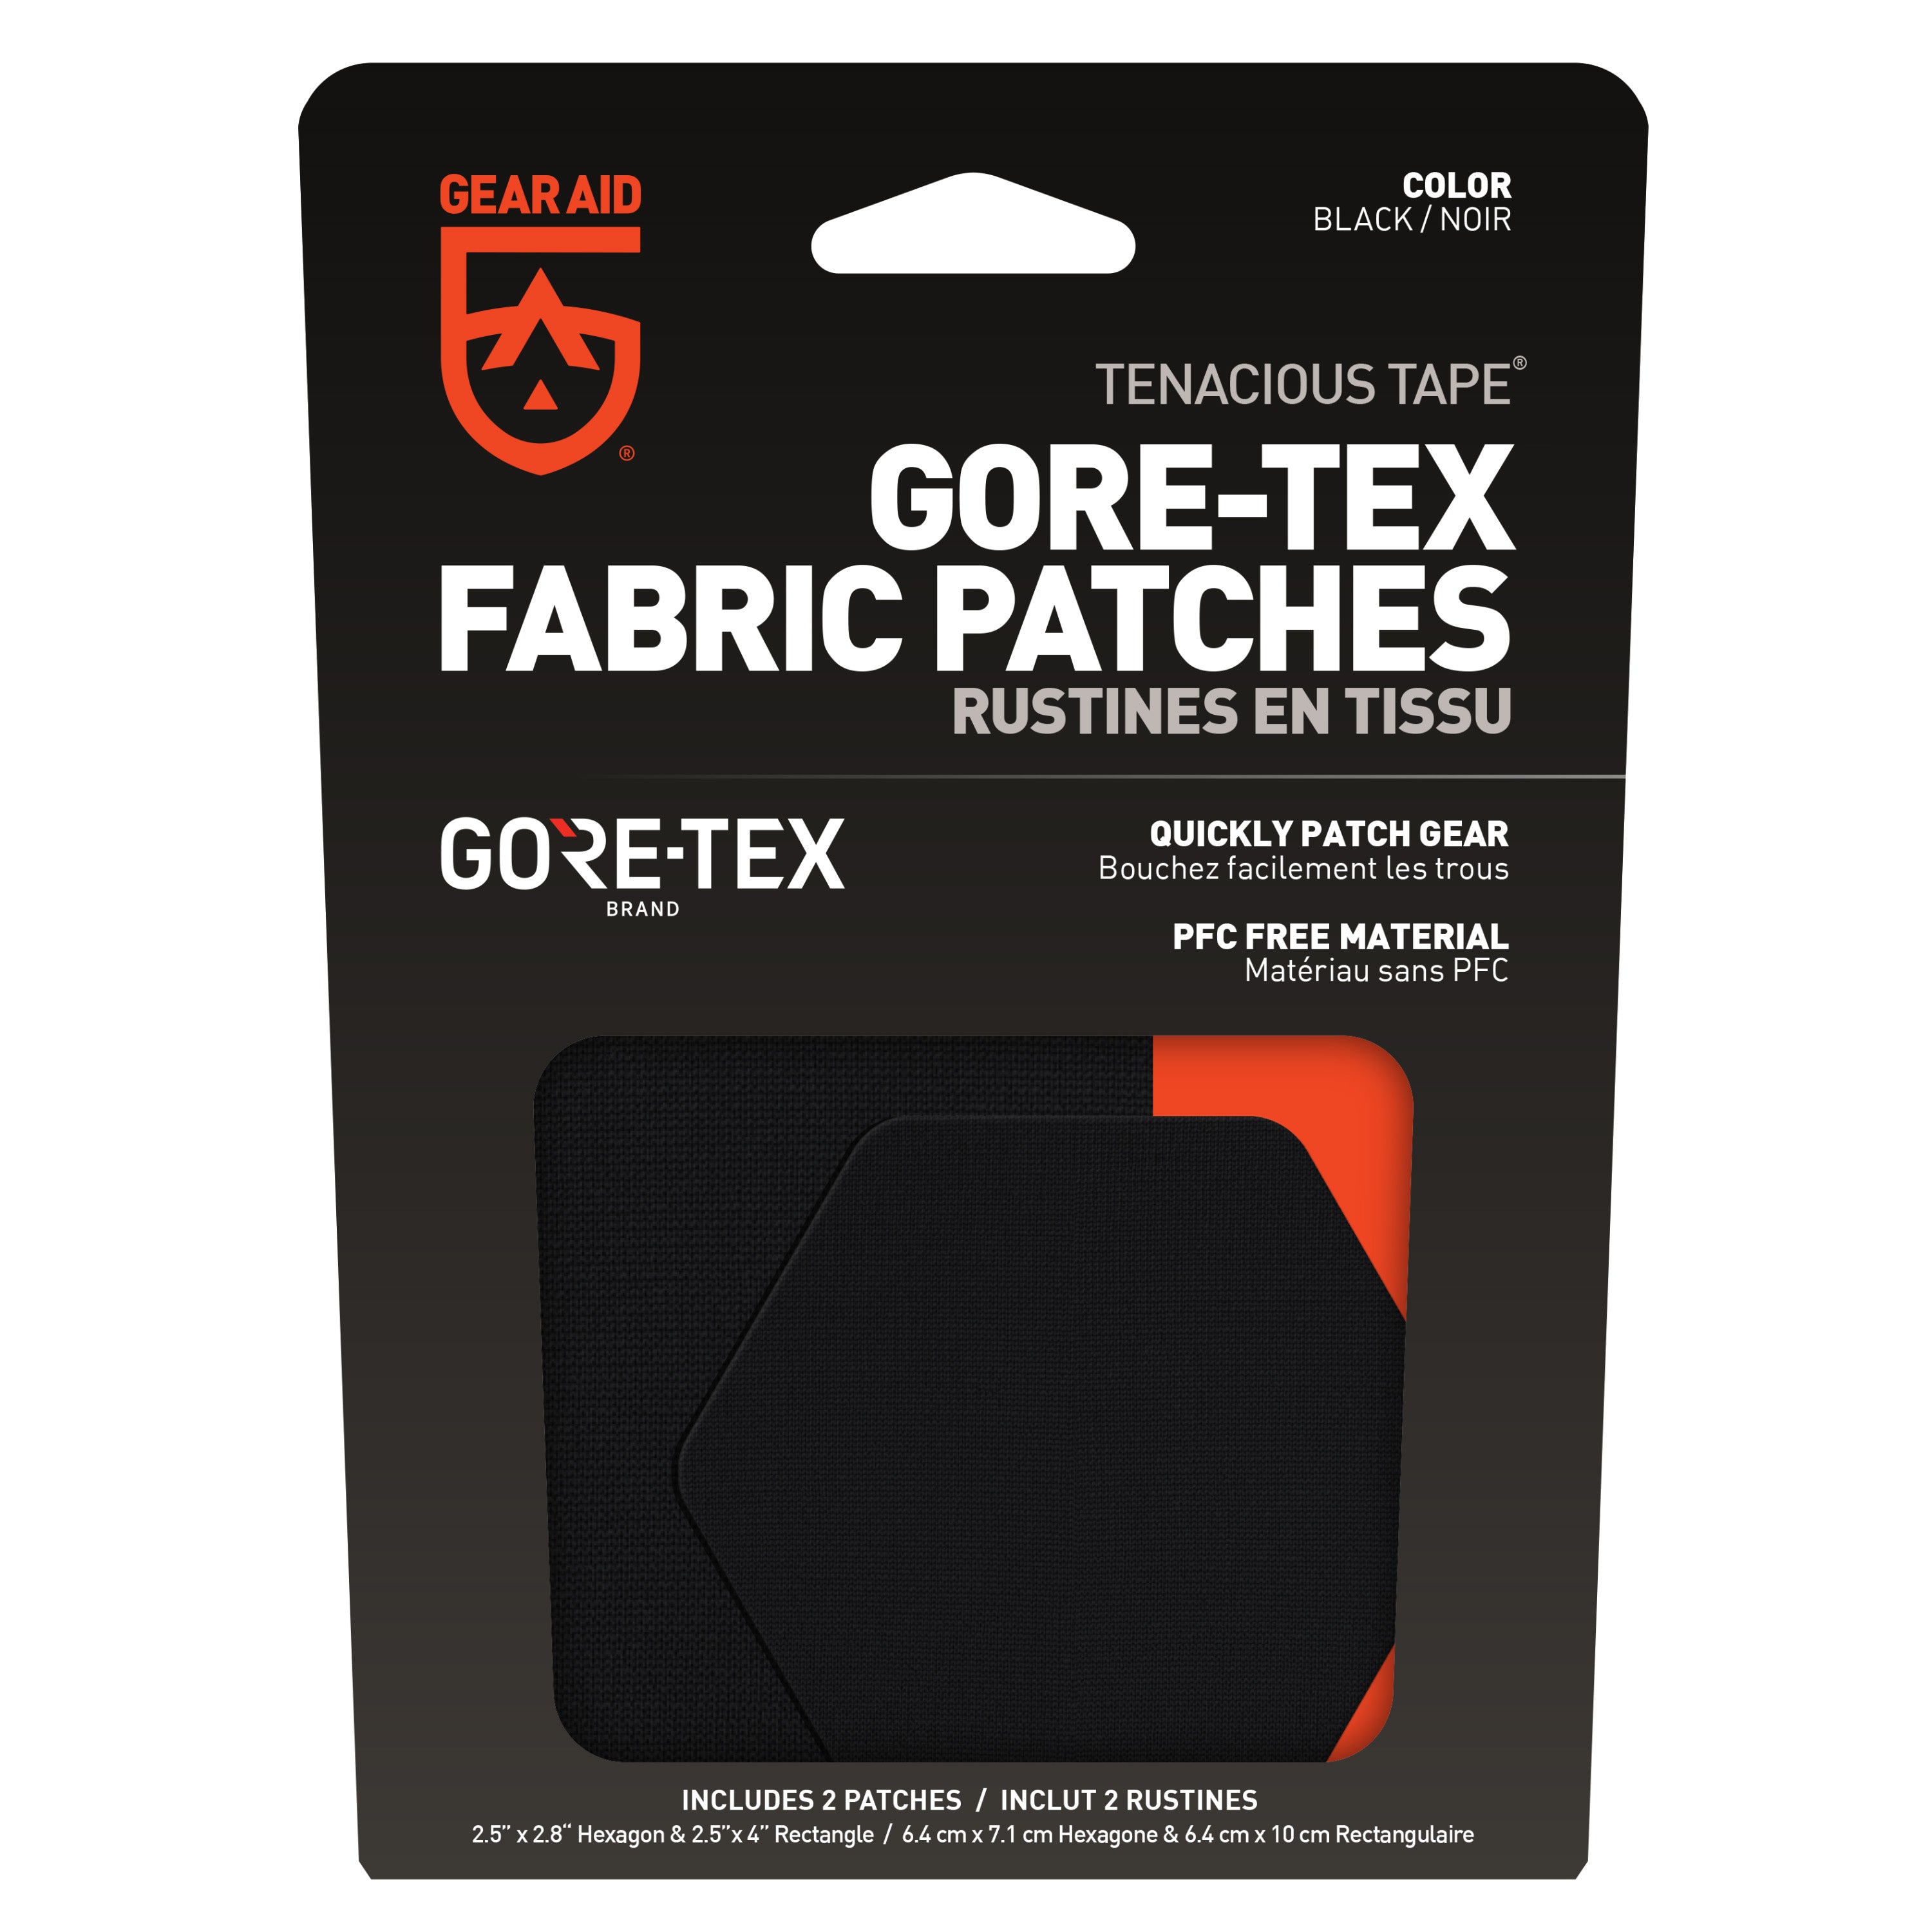 Tenacious Tape Gore Tex Fabric Patches – Murray's Fly Shop